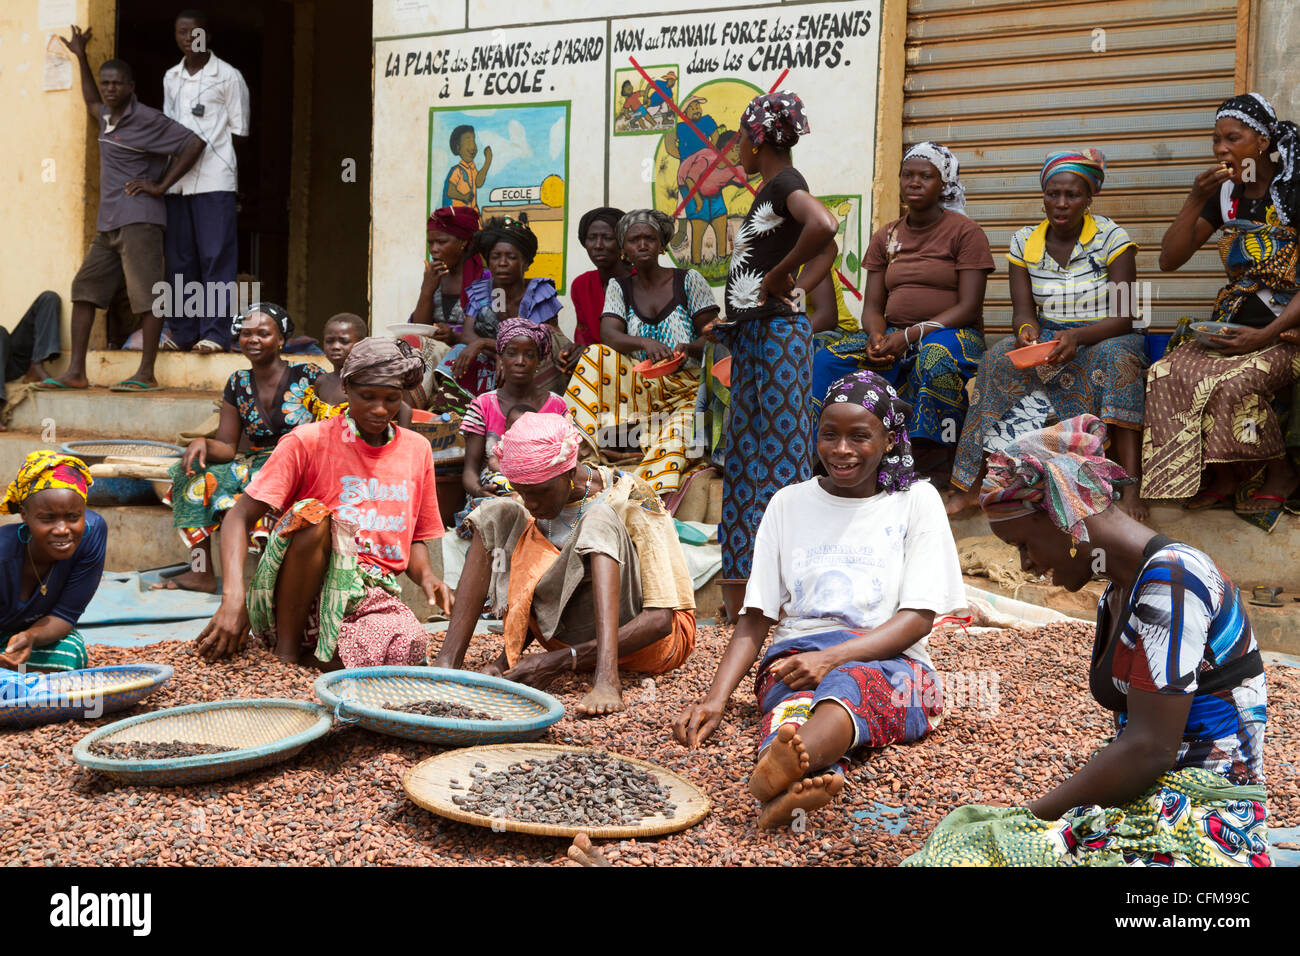 Women sorting  beans of cacao in front of a public notice against the child labor ,Duekoue, Ivory Coast ,Cote d'Ivoire Stock Photo